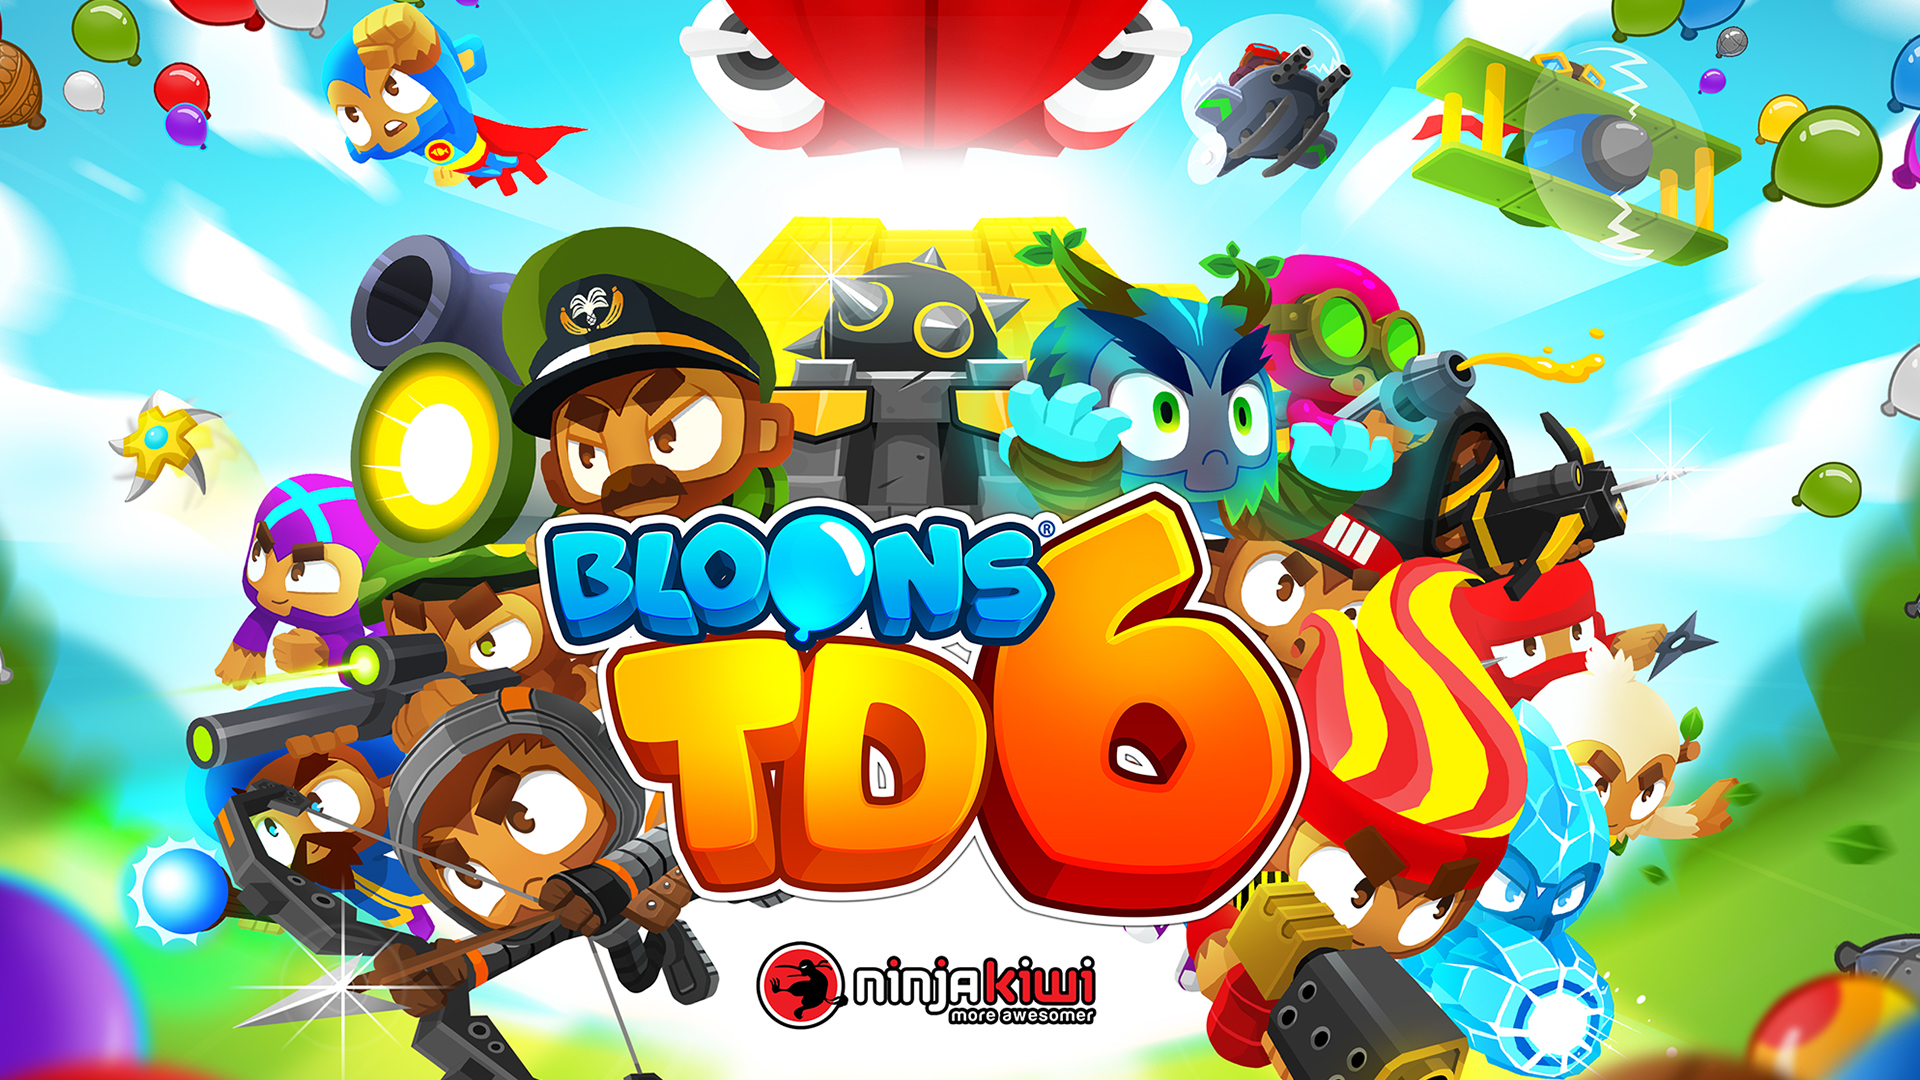 The Popular Bloons Td 6 Tower Defense Game For Ios Hits All Time